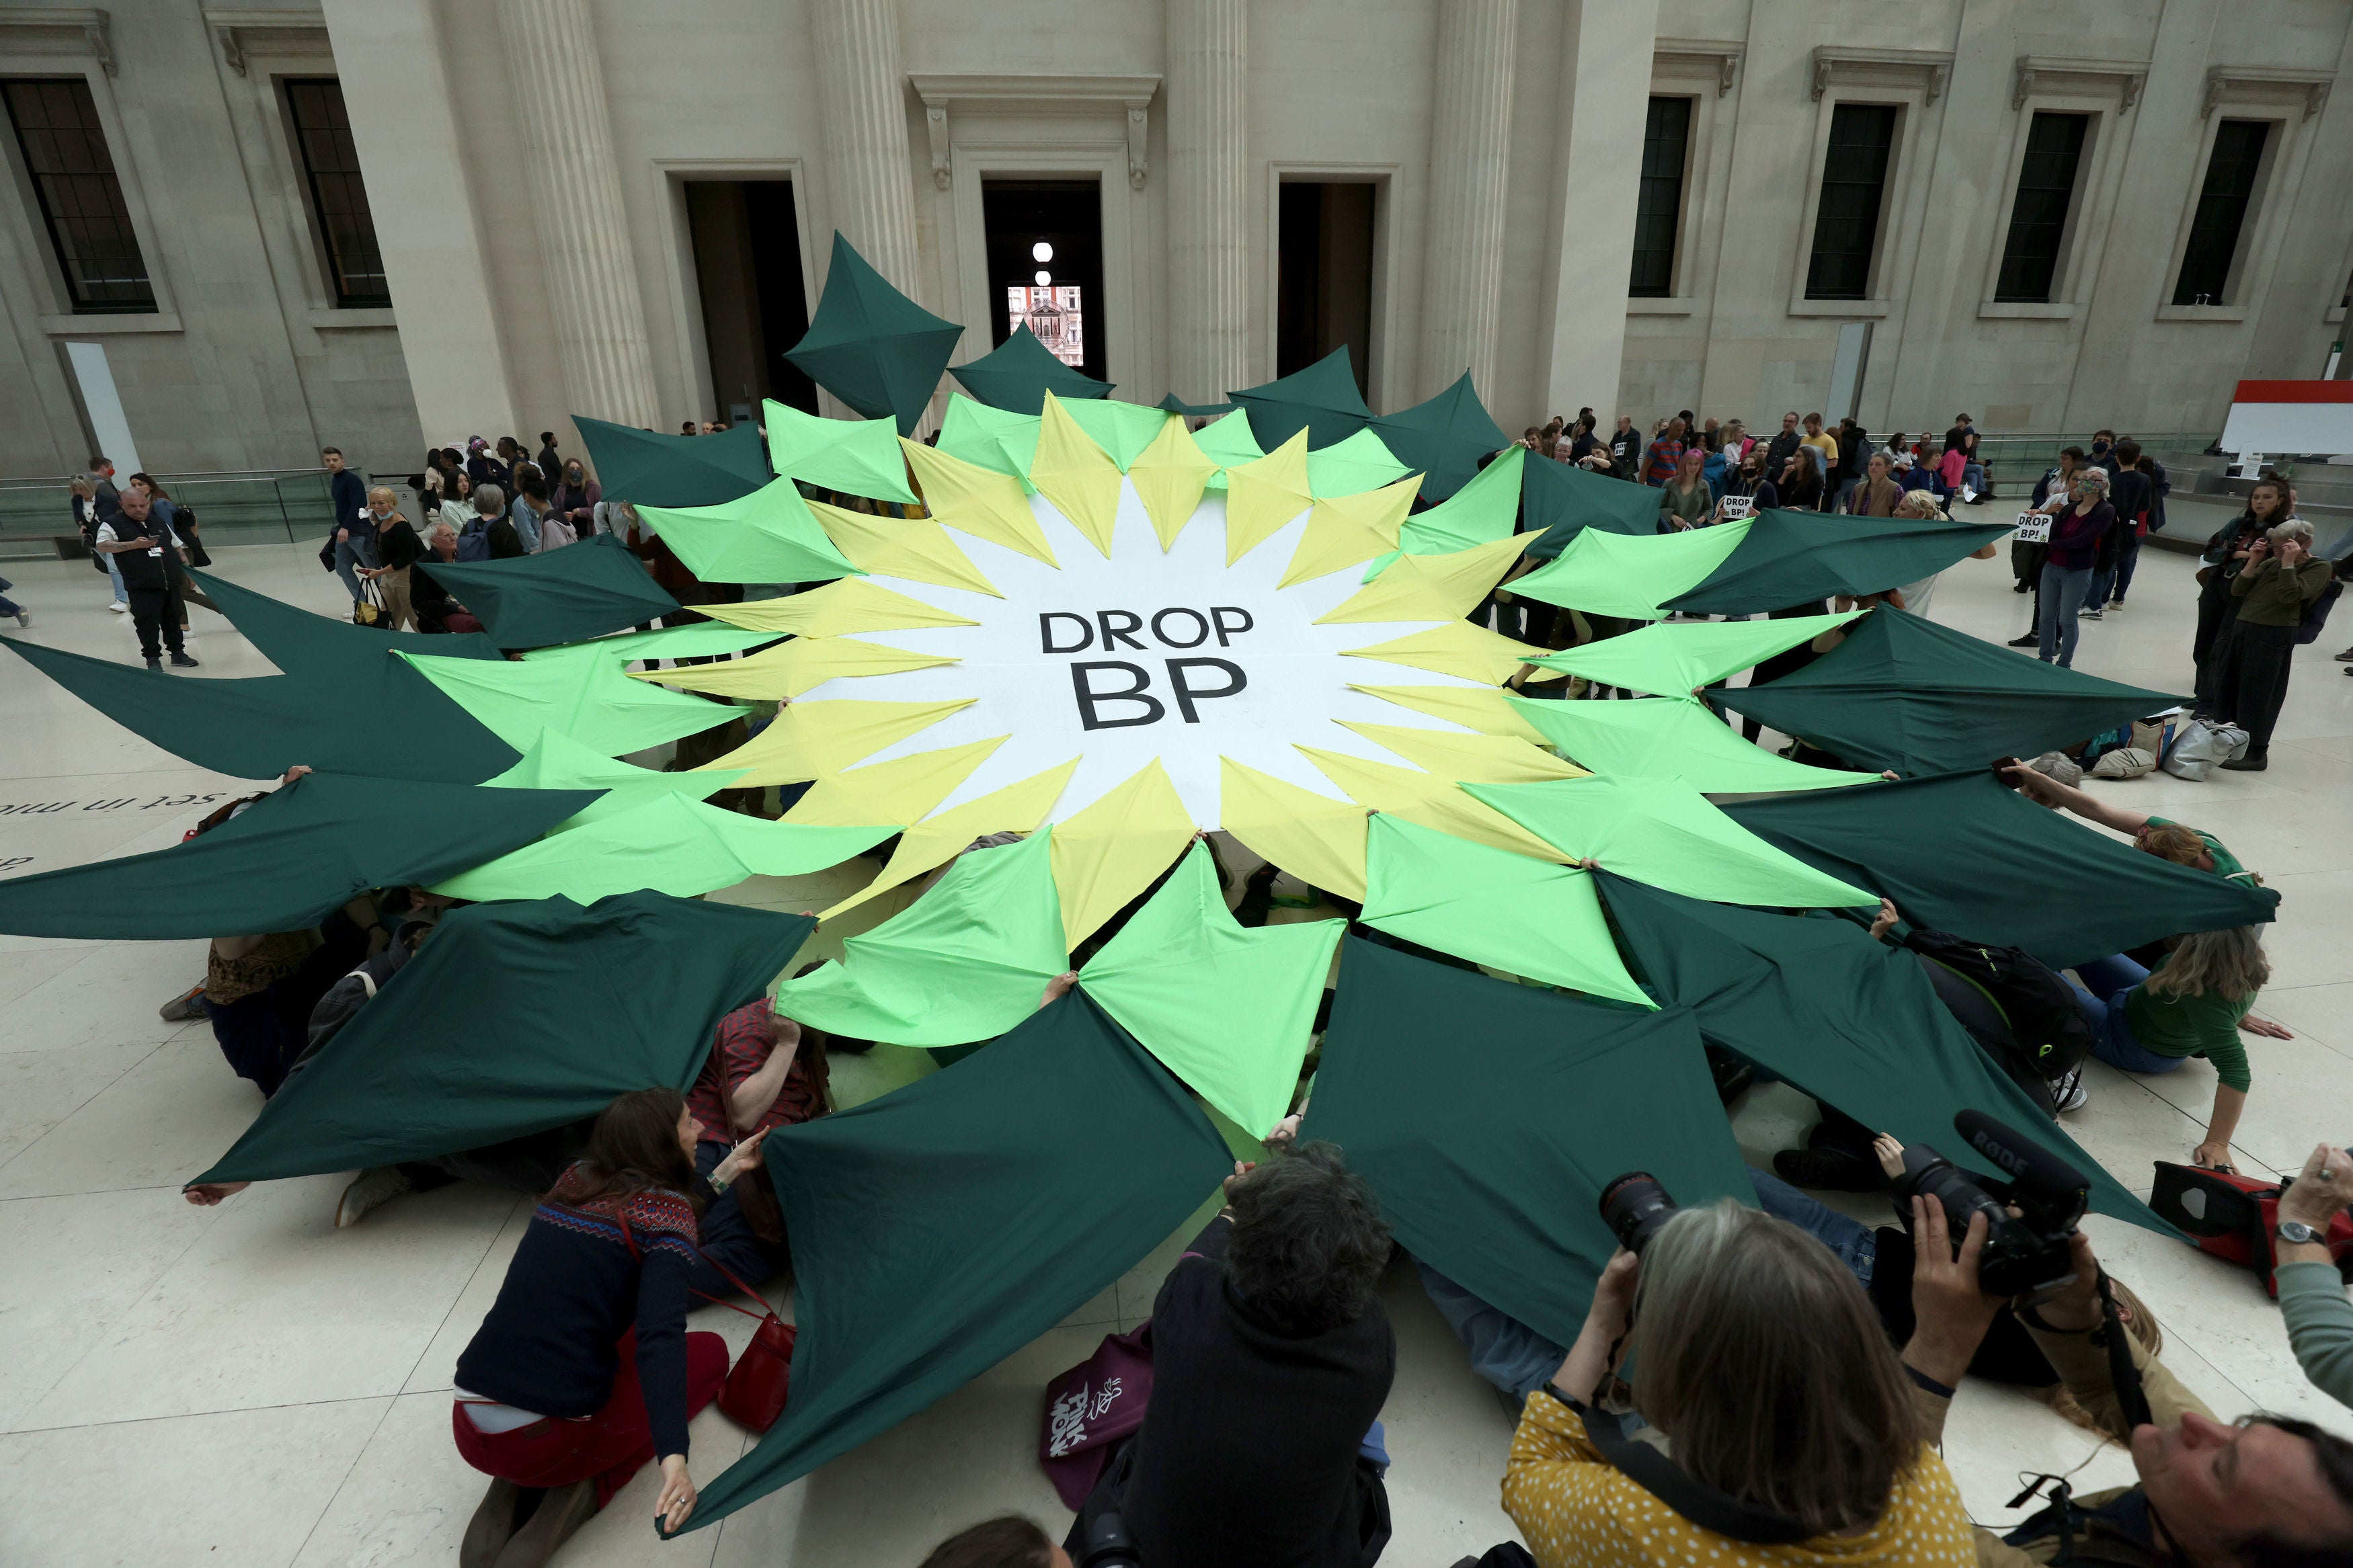 Extinction Rebellion protesters hold a ‘Drop BP’ sign inside the British Museum in April 2022